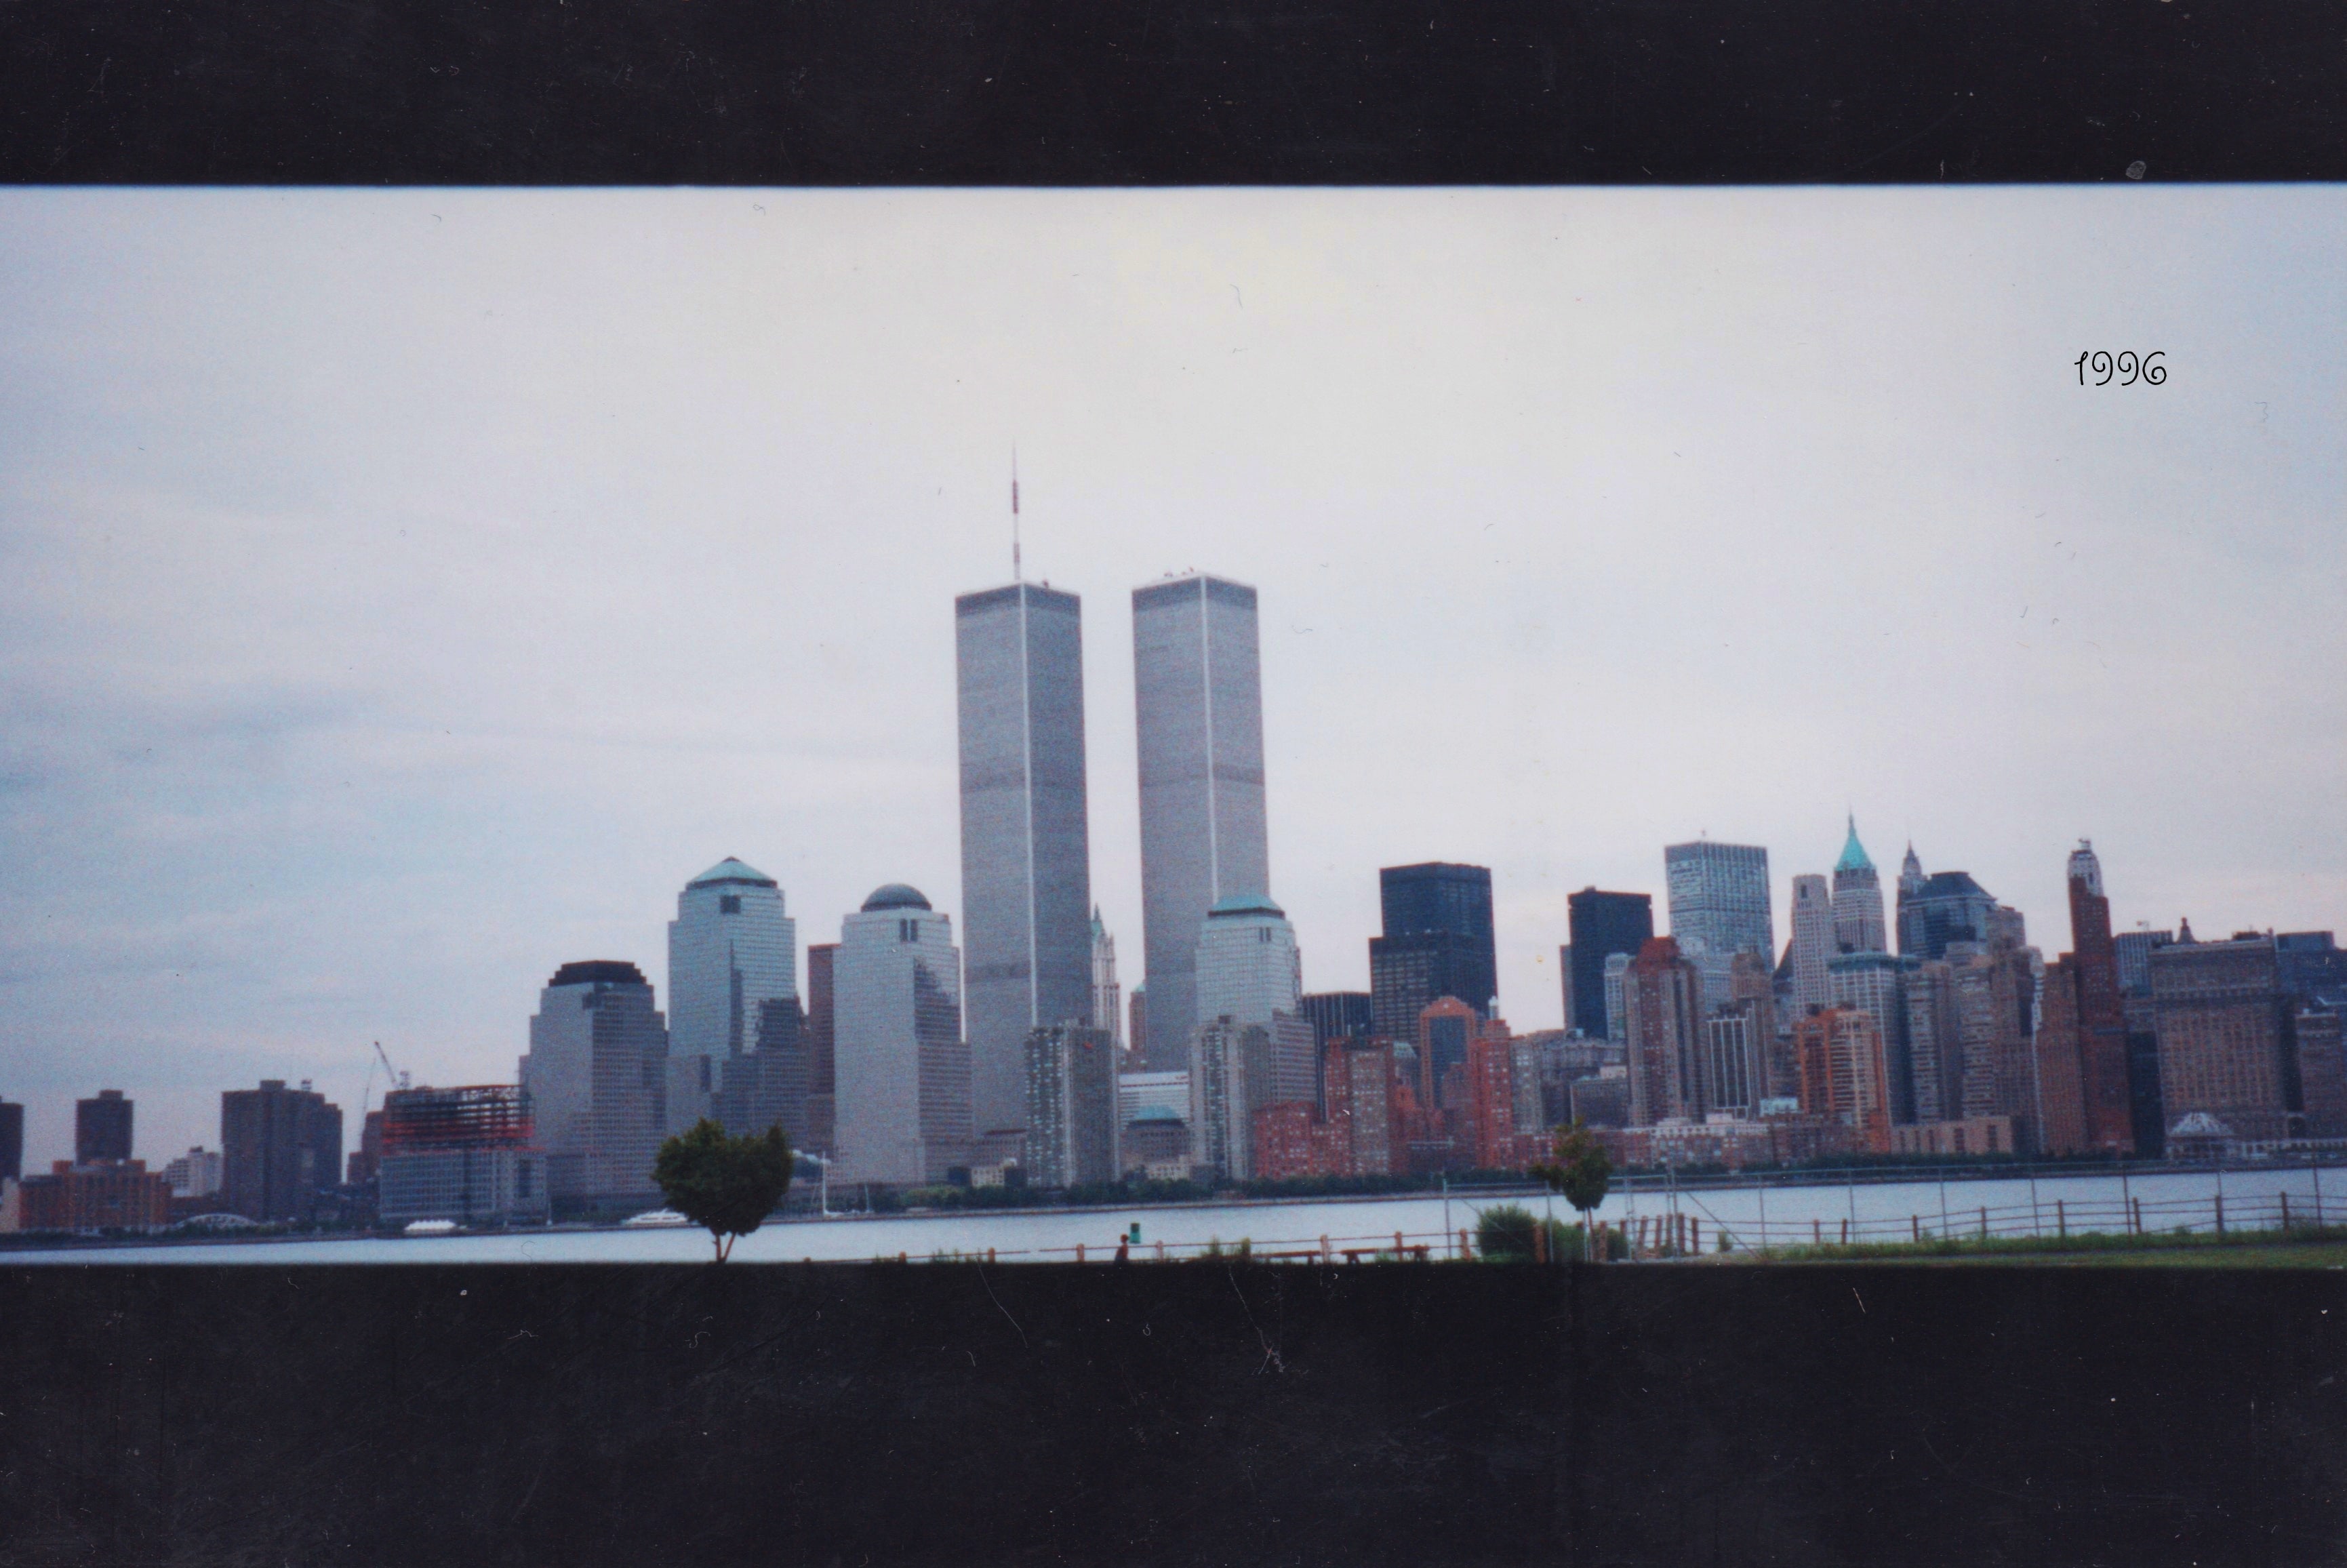 "Ravens in Winter": Reflections on 9/11